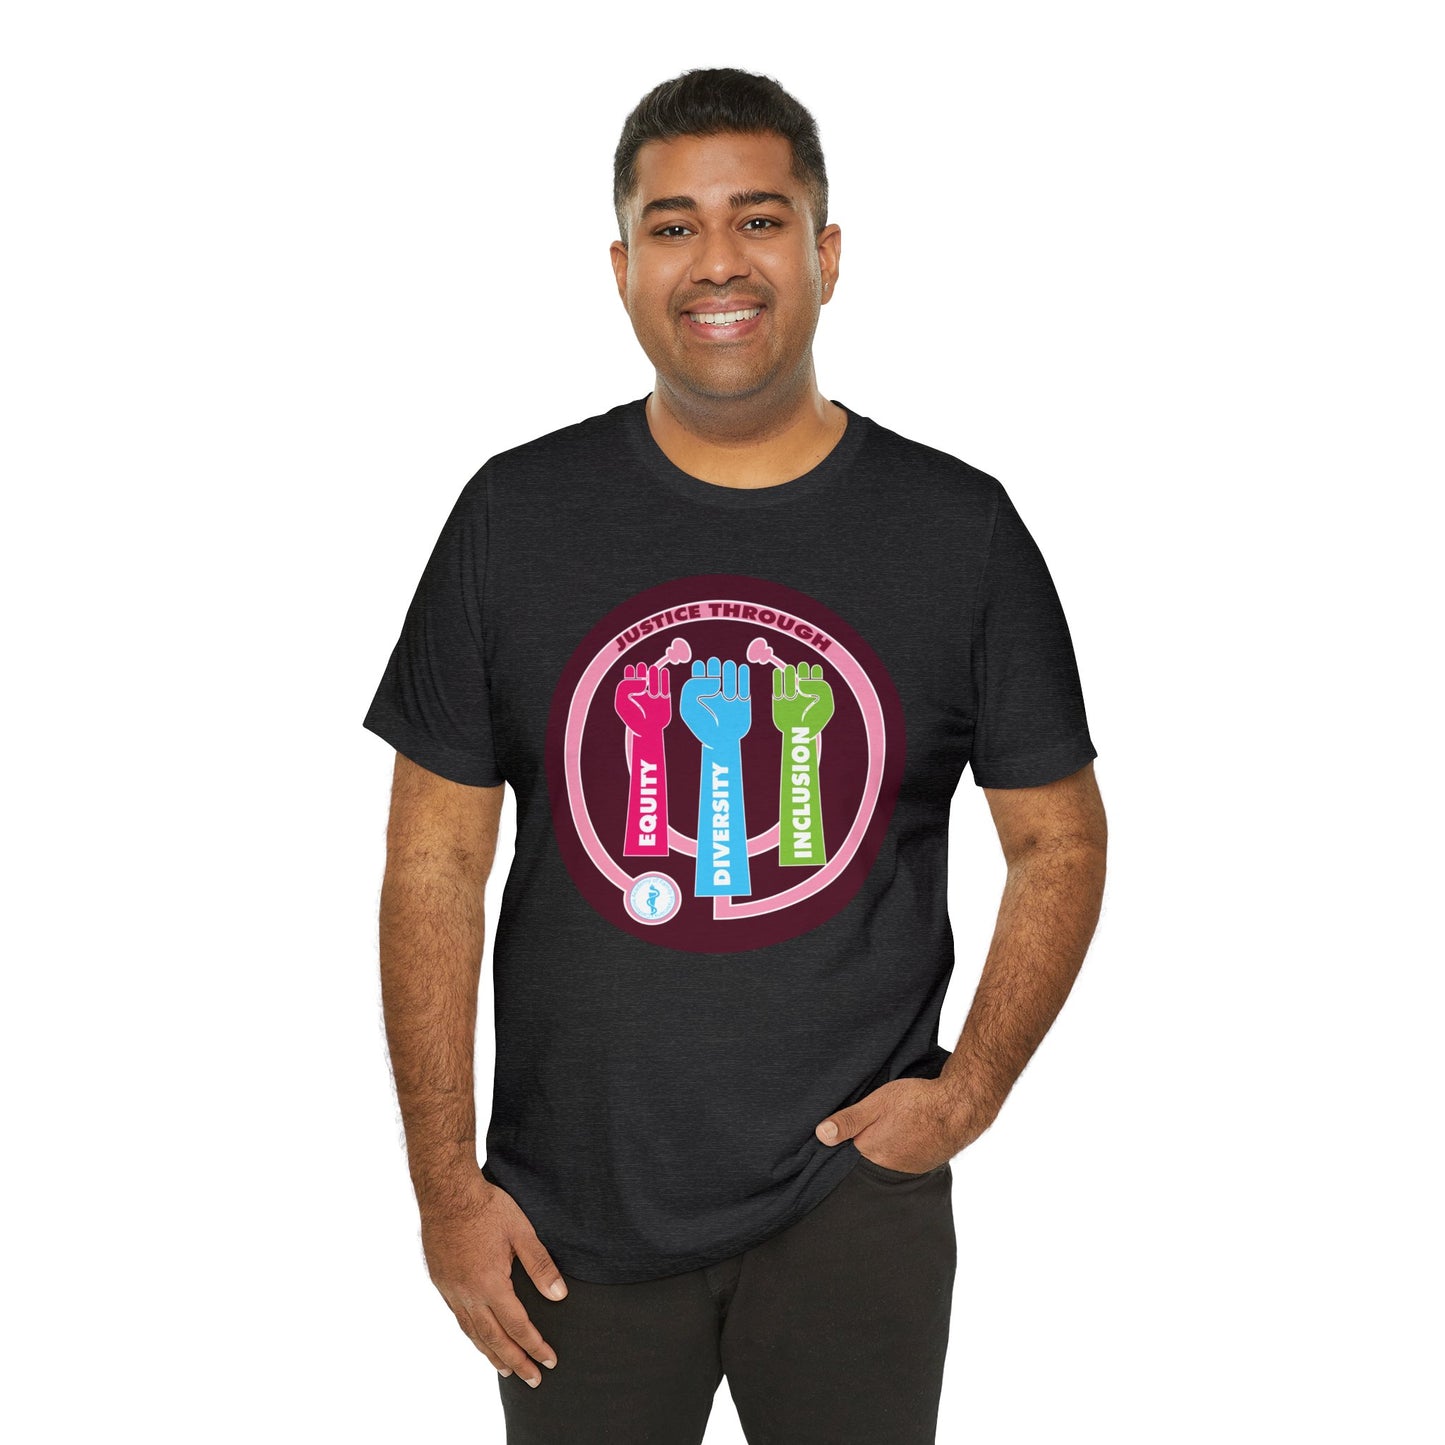 Justice Through Equity, Diversity, and Inclusion Unisex Jersey Short Sleeve Tee